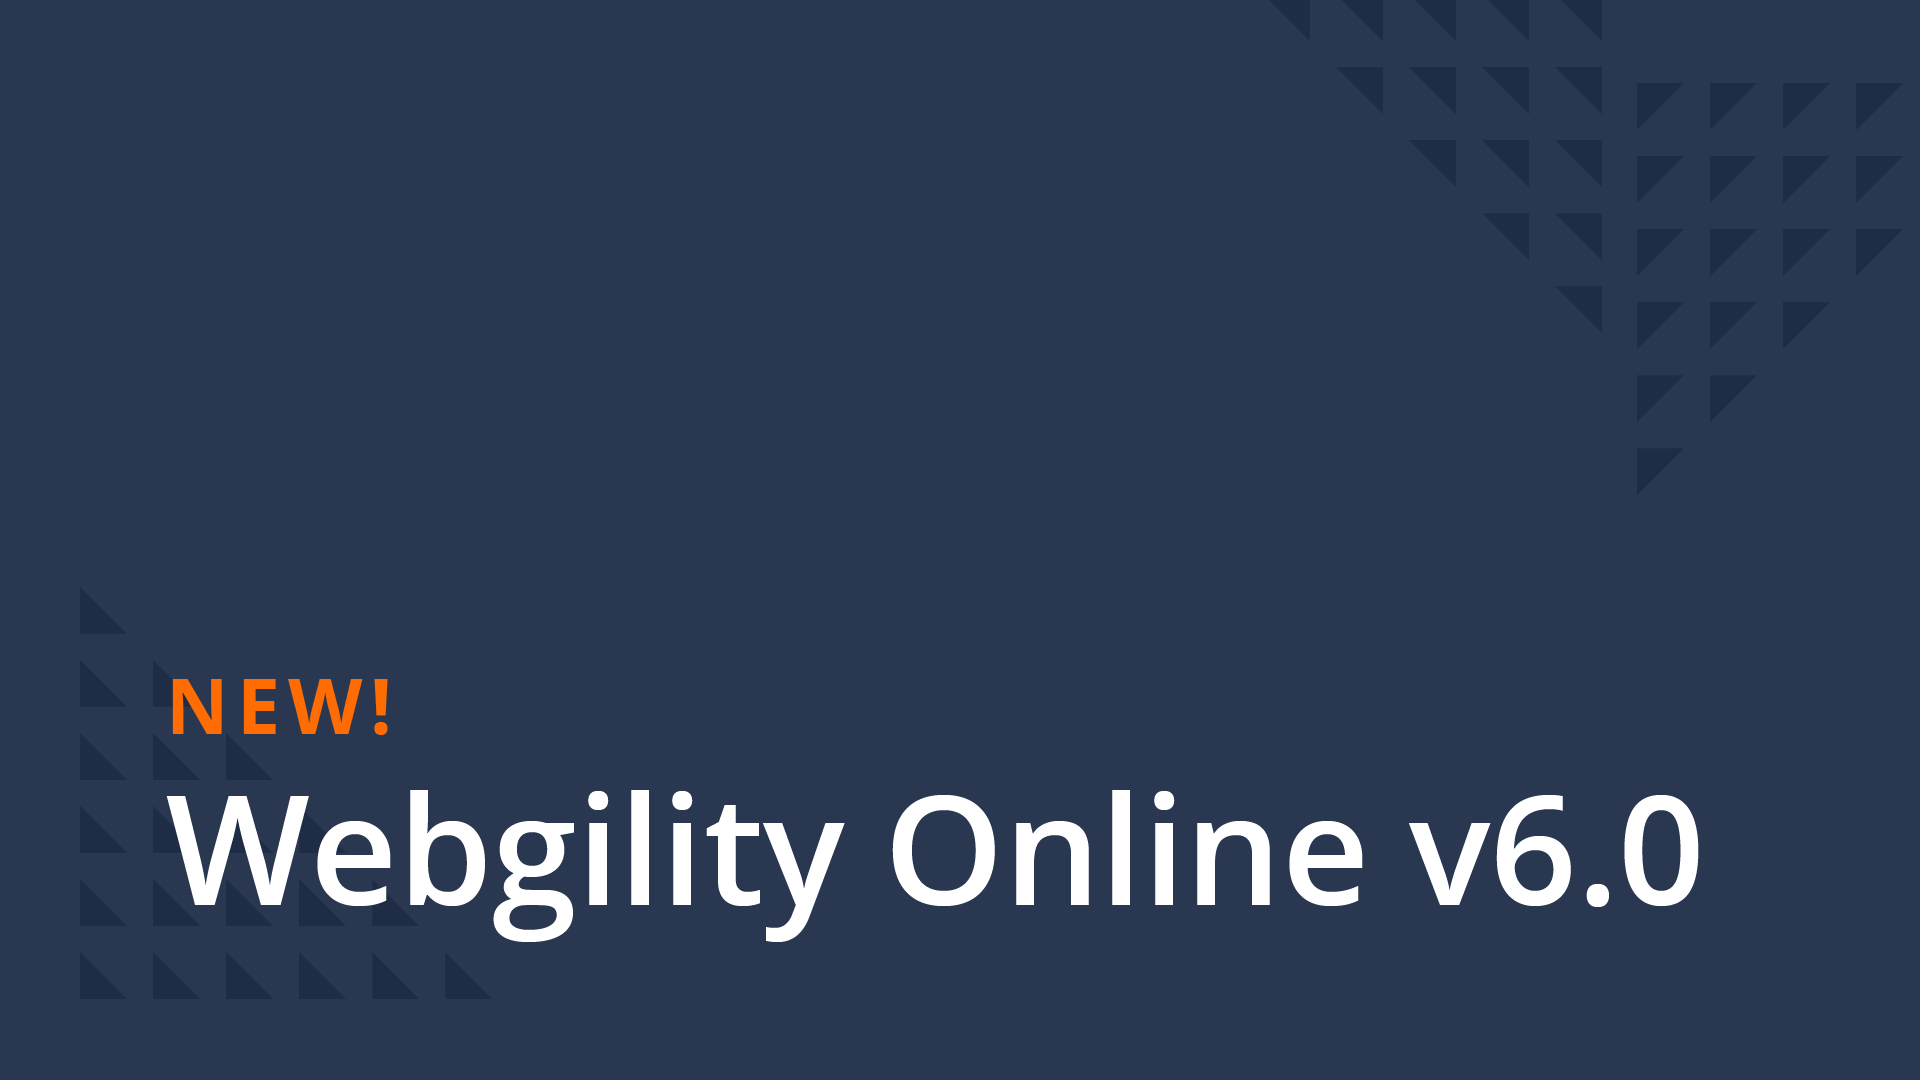 Welcome to Webgility Online Version 6